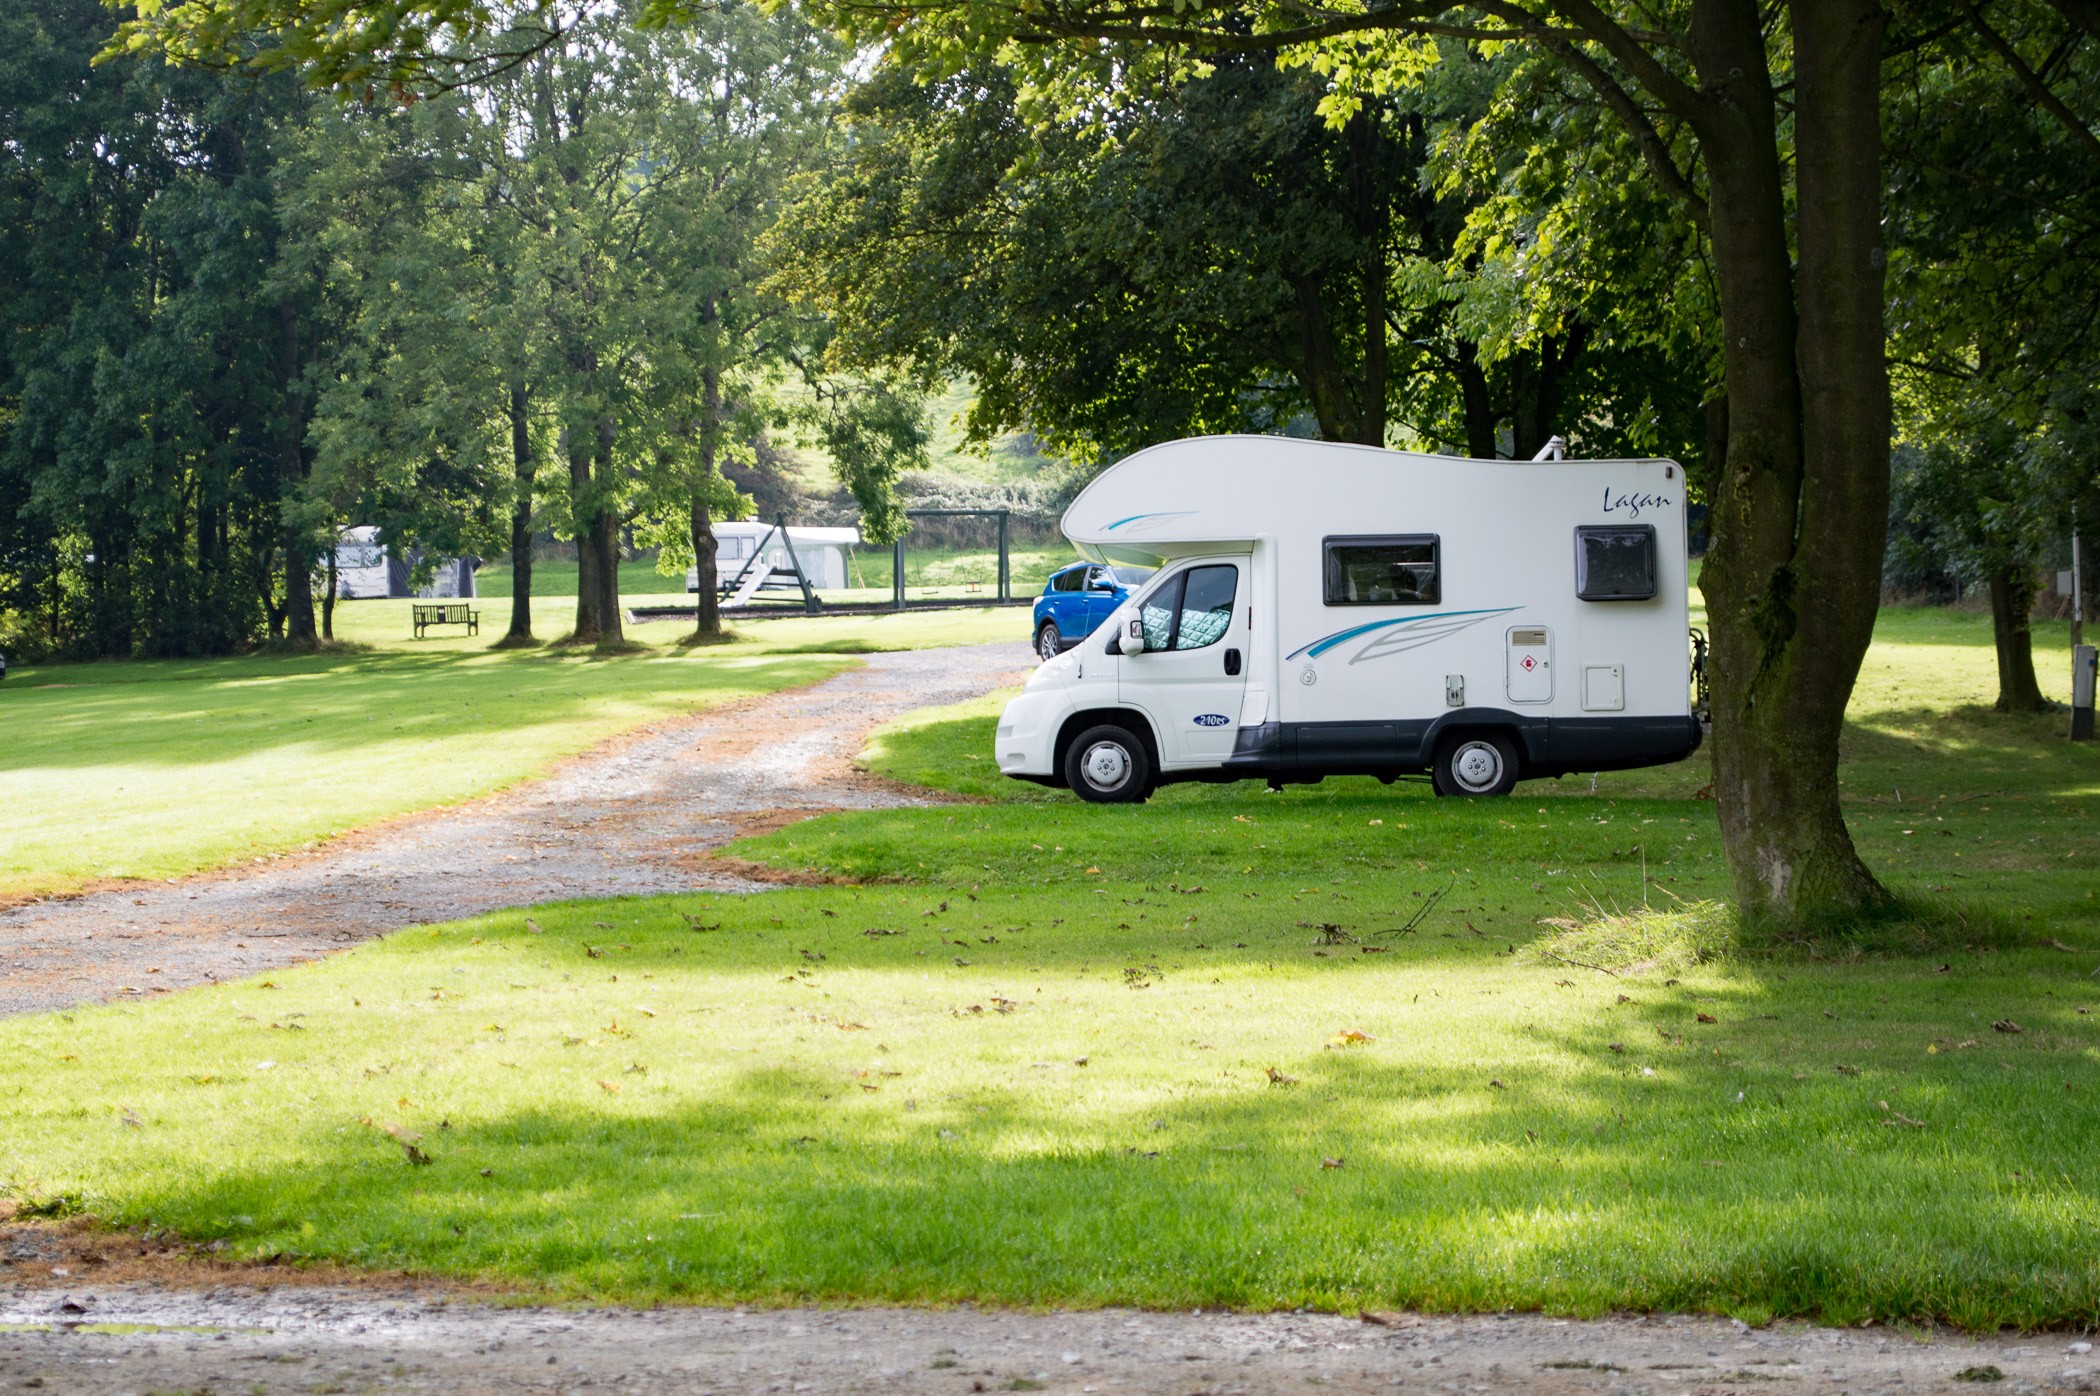 Bakewell Campsite level pitches